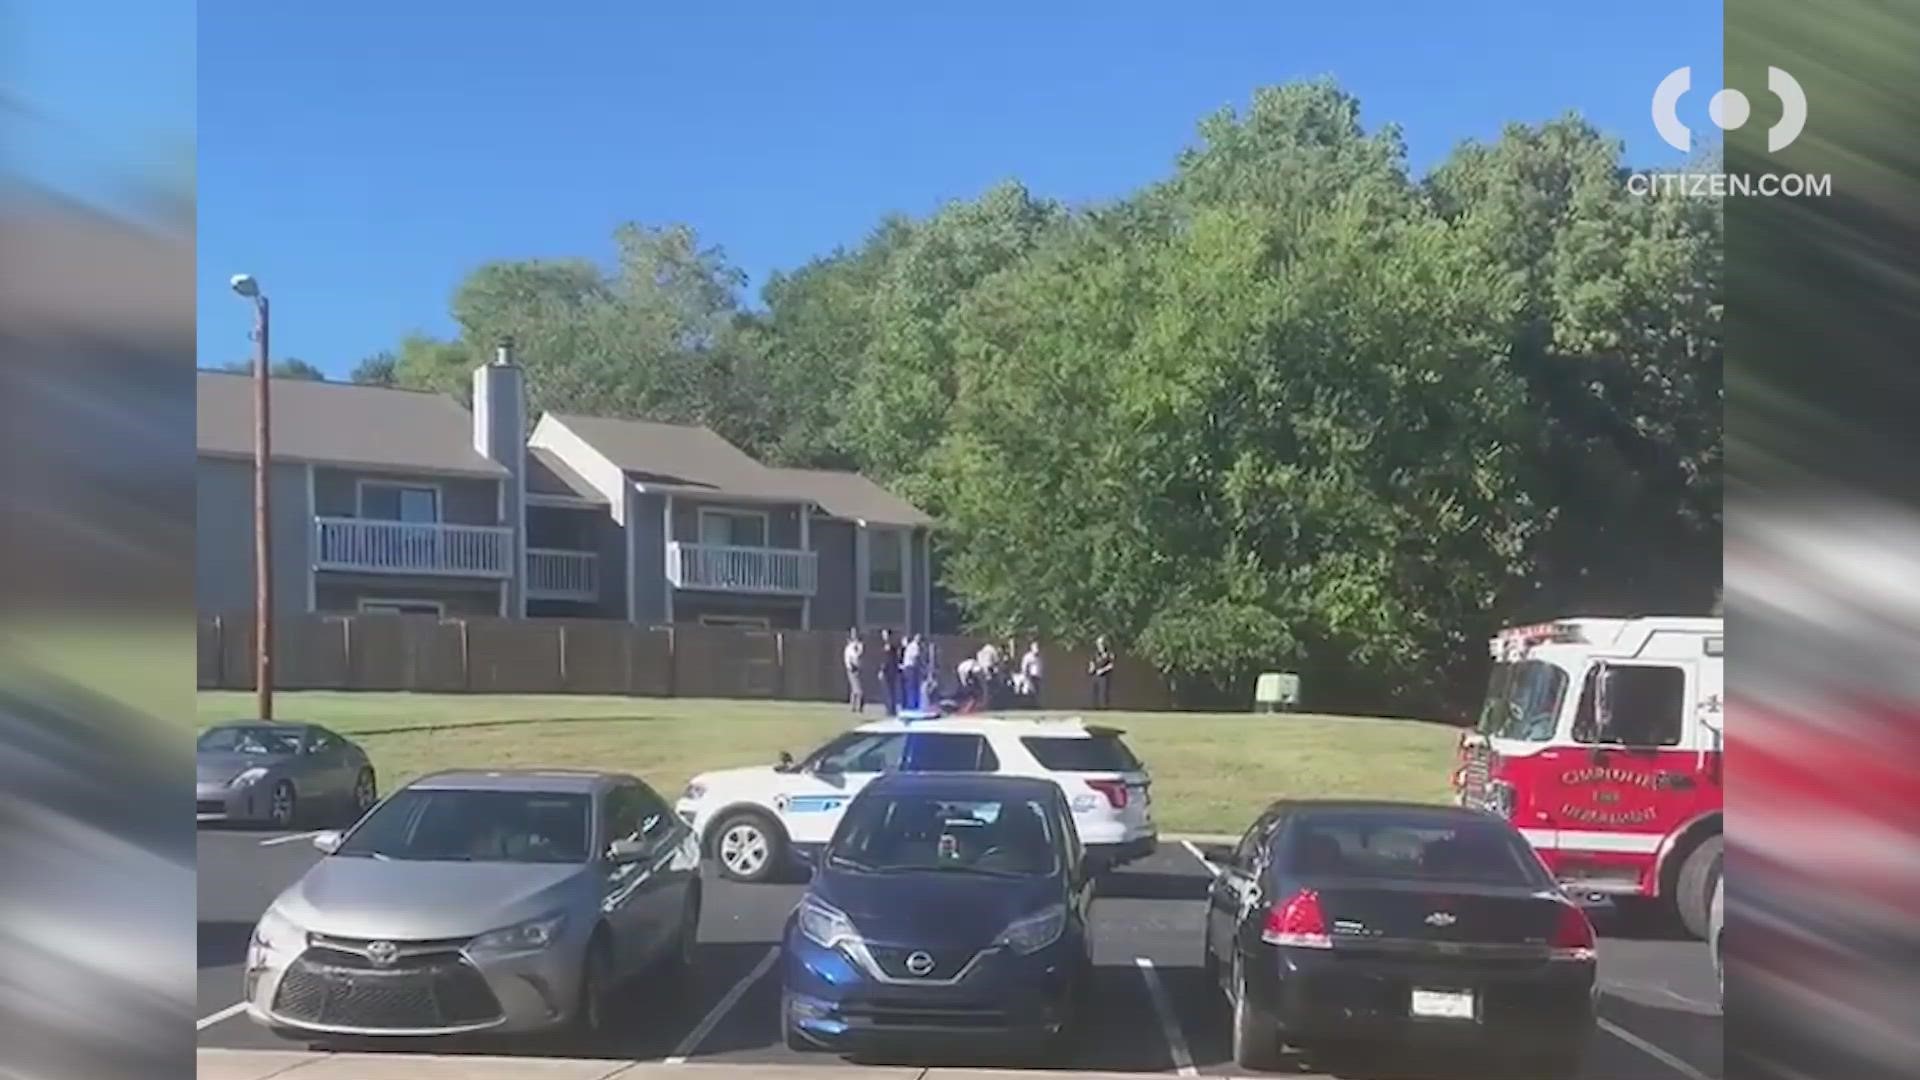 Citizen App video shows CMPD taken a possible shooting suspect into custody in south Charlotte.